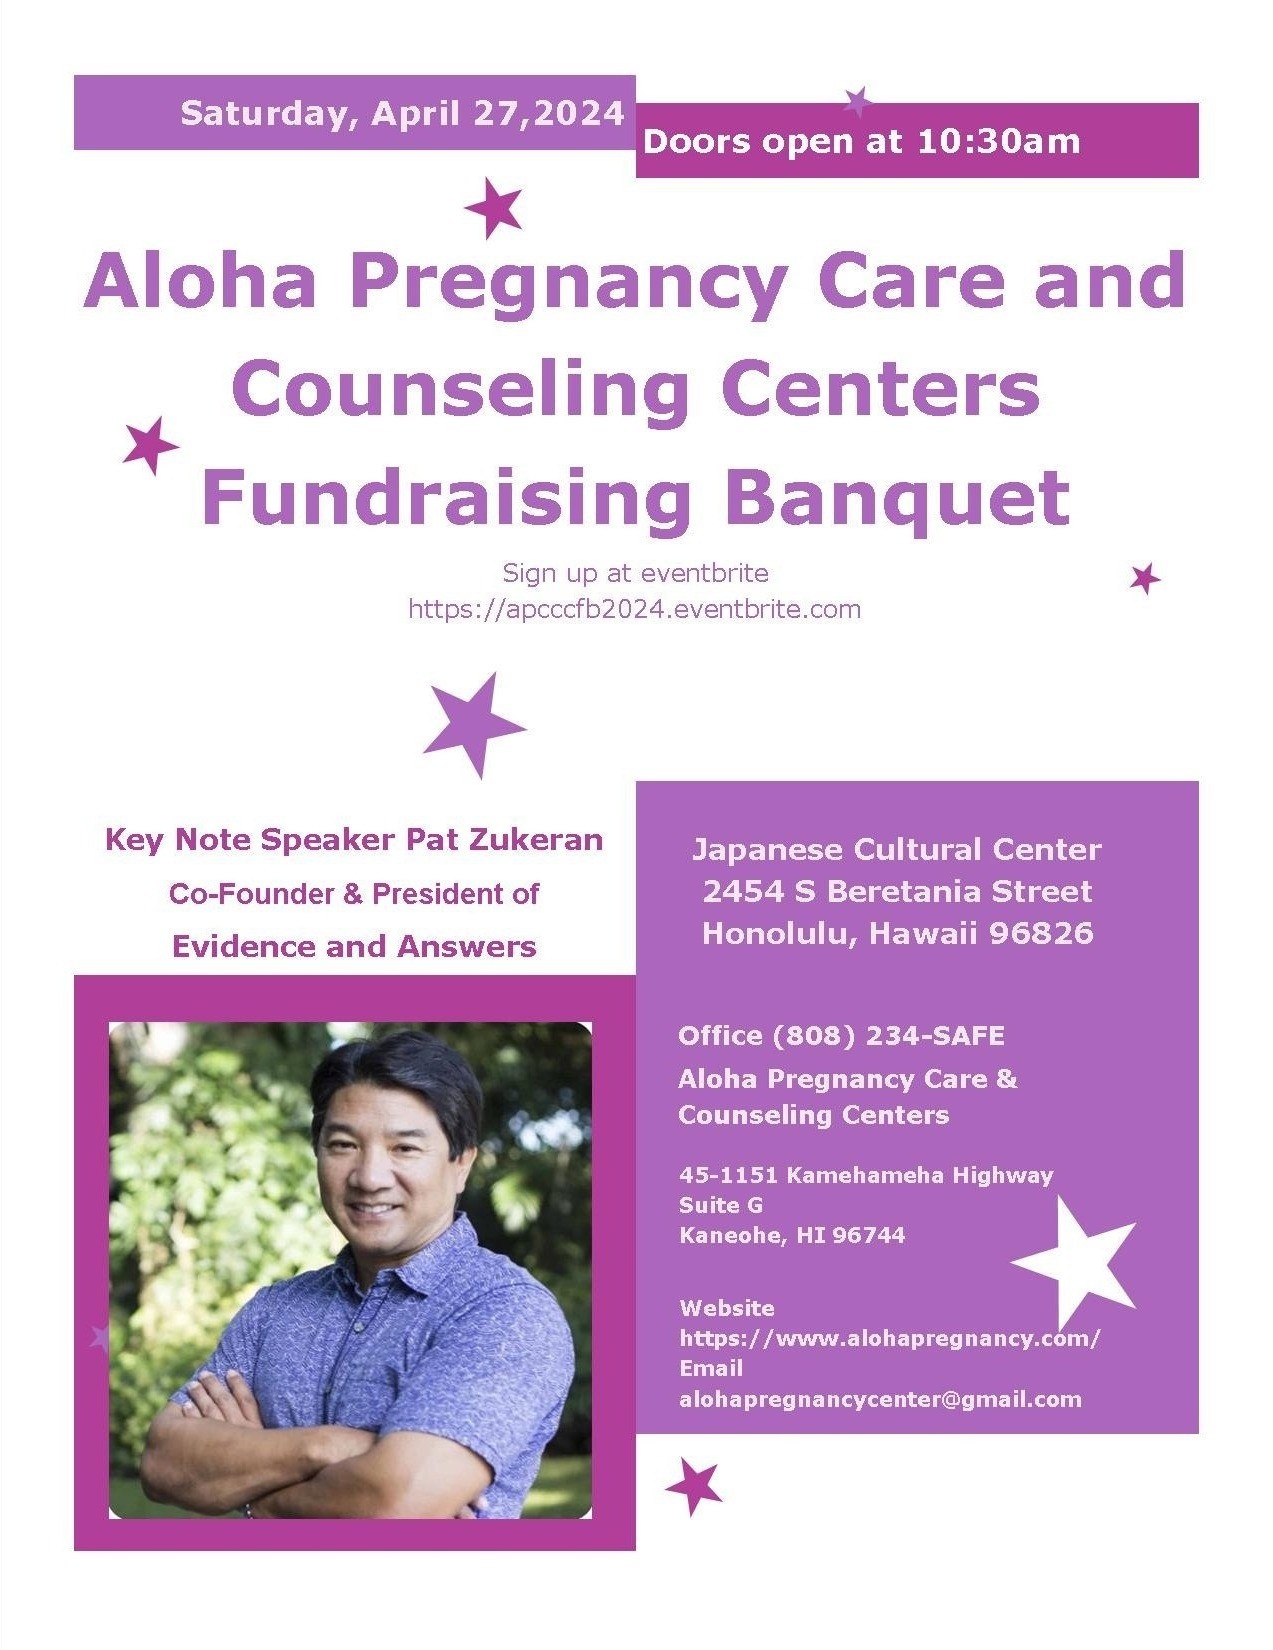 Saturday, April 27, 2024, Annual Aloha Pregnancy Care and Counseling Center Fundraising Banquet! It will be held at the Japanese Cultural Center 2454 S Beretania Street Honolulu, Hawaii 96826.